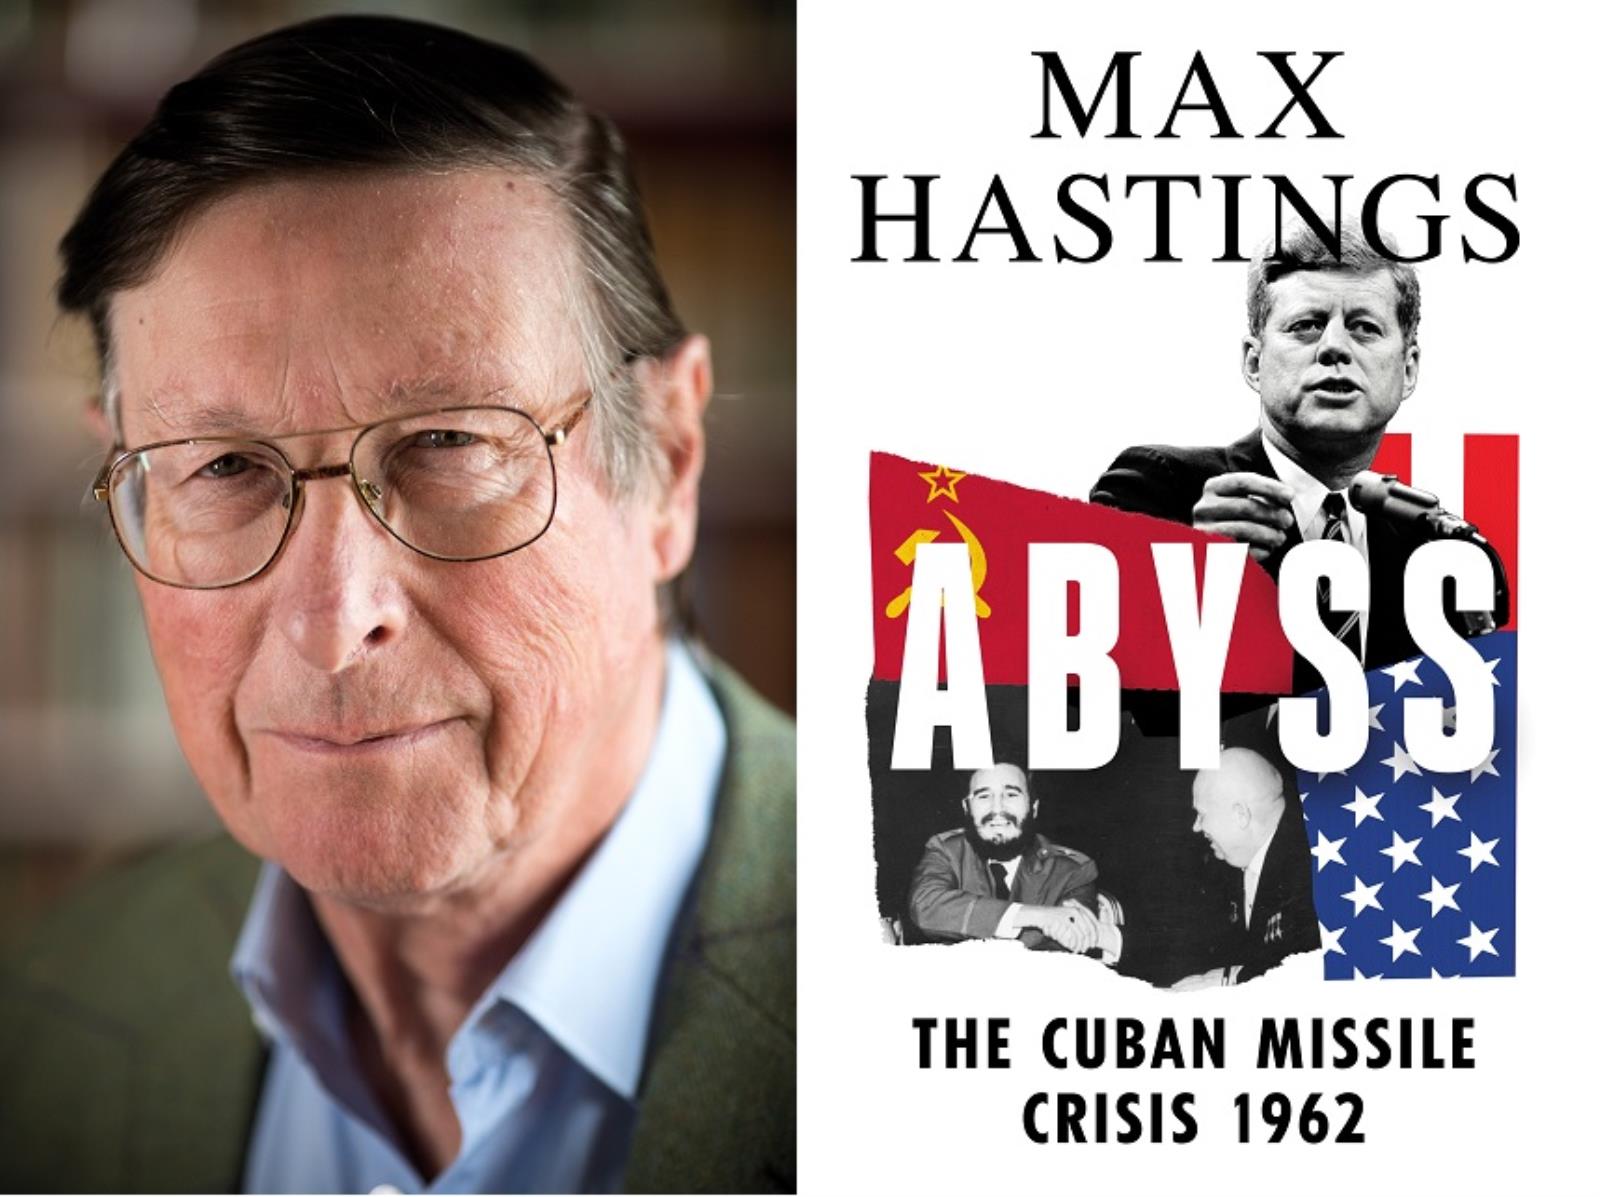 An Evening with Sir Max Hastings